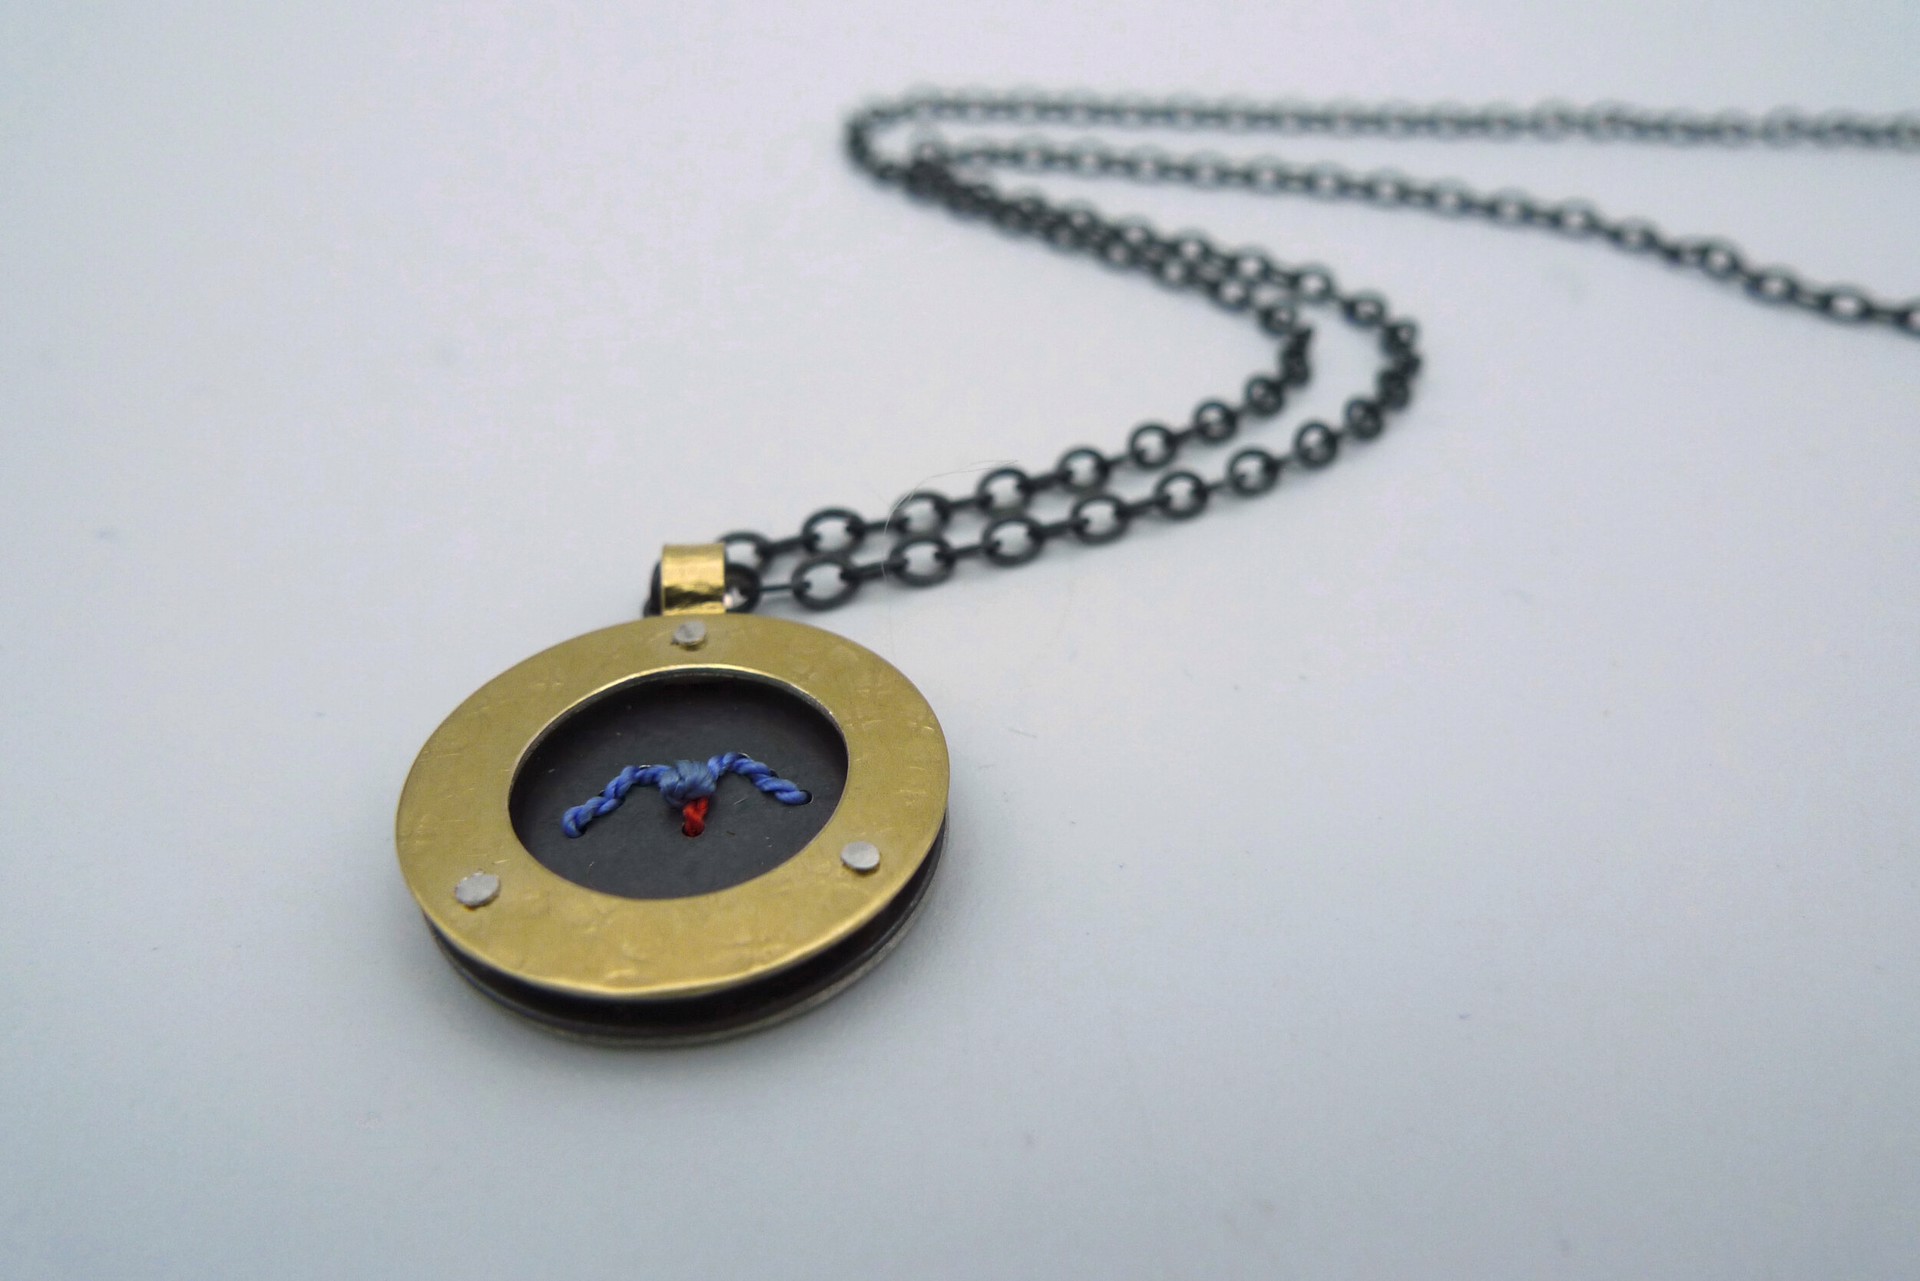 Bluebird (of Happiness) Necklace by Erica Schlueter